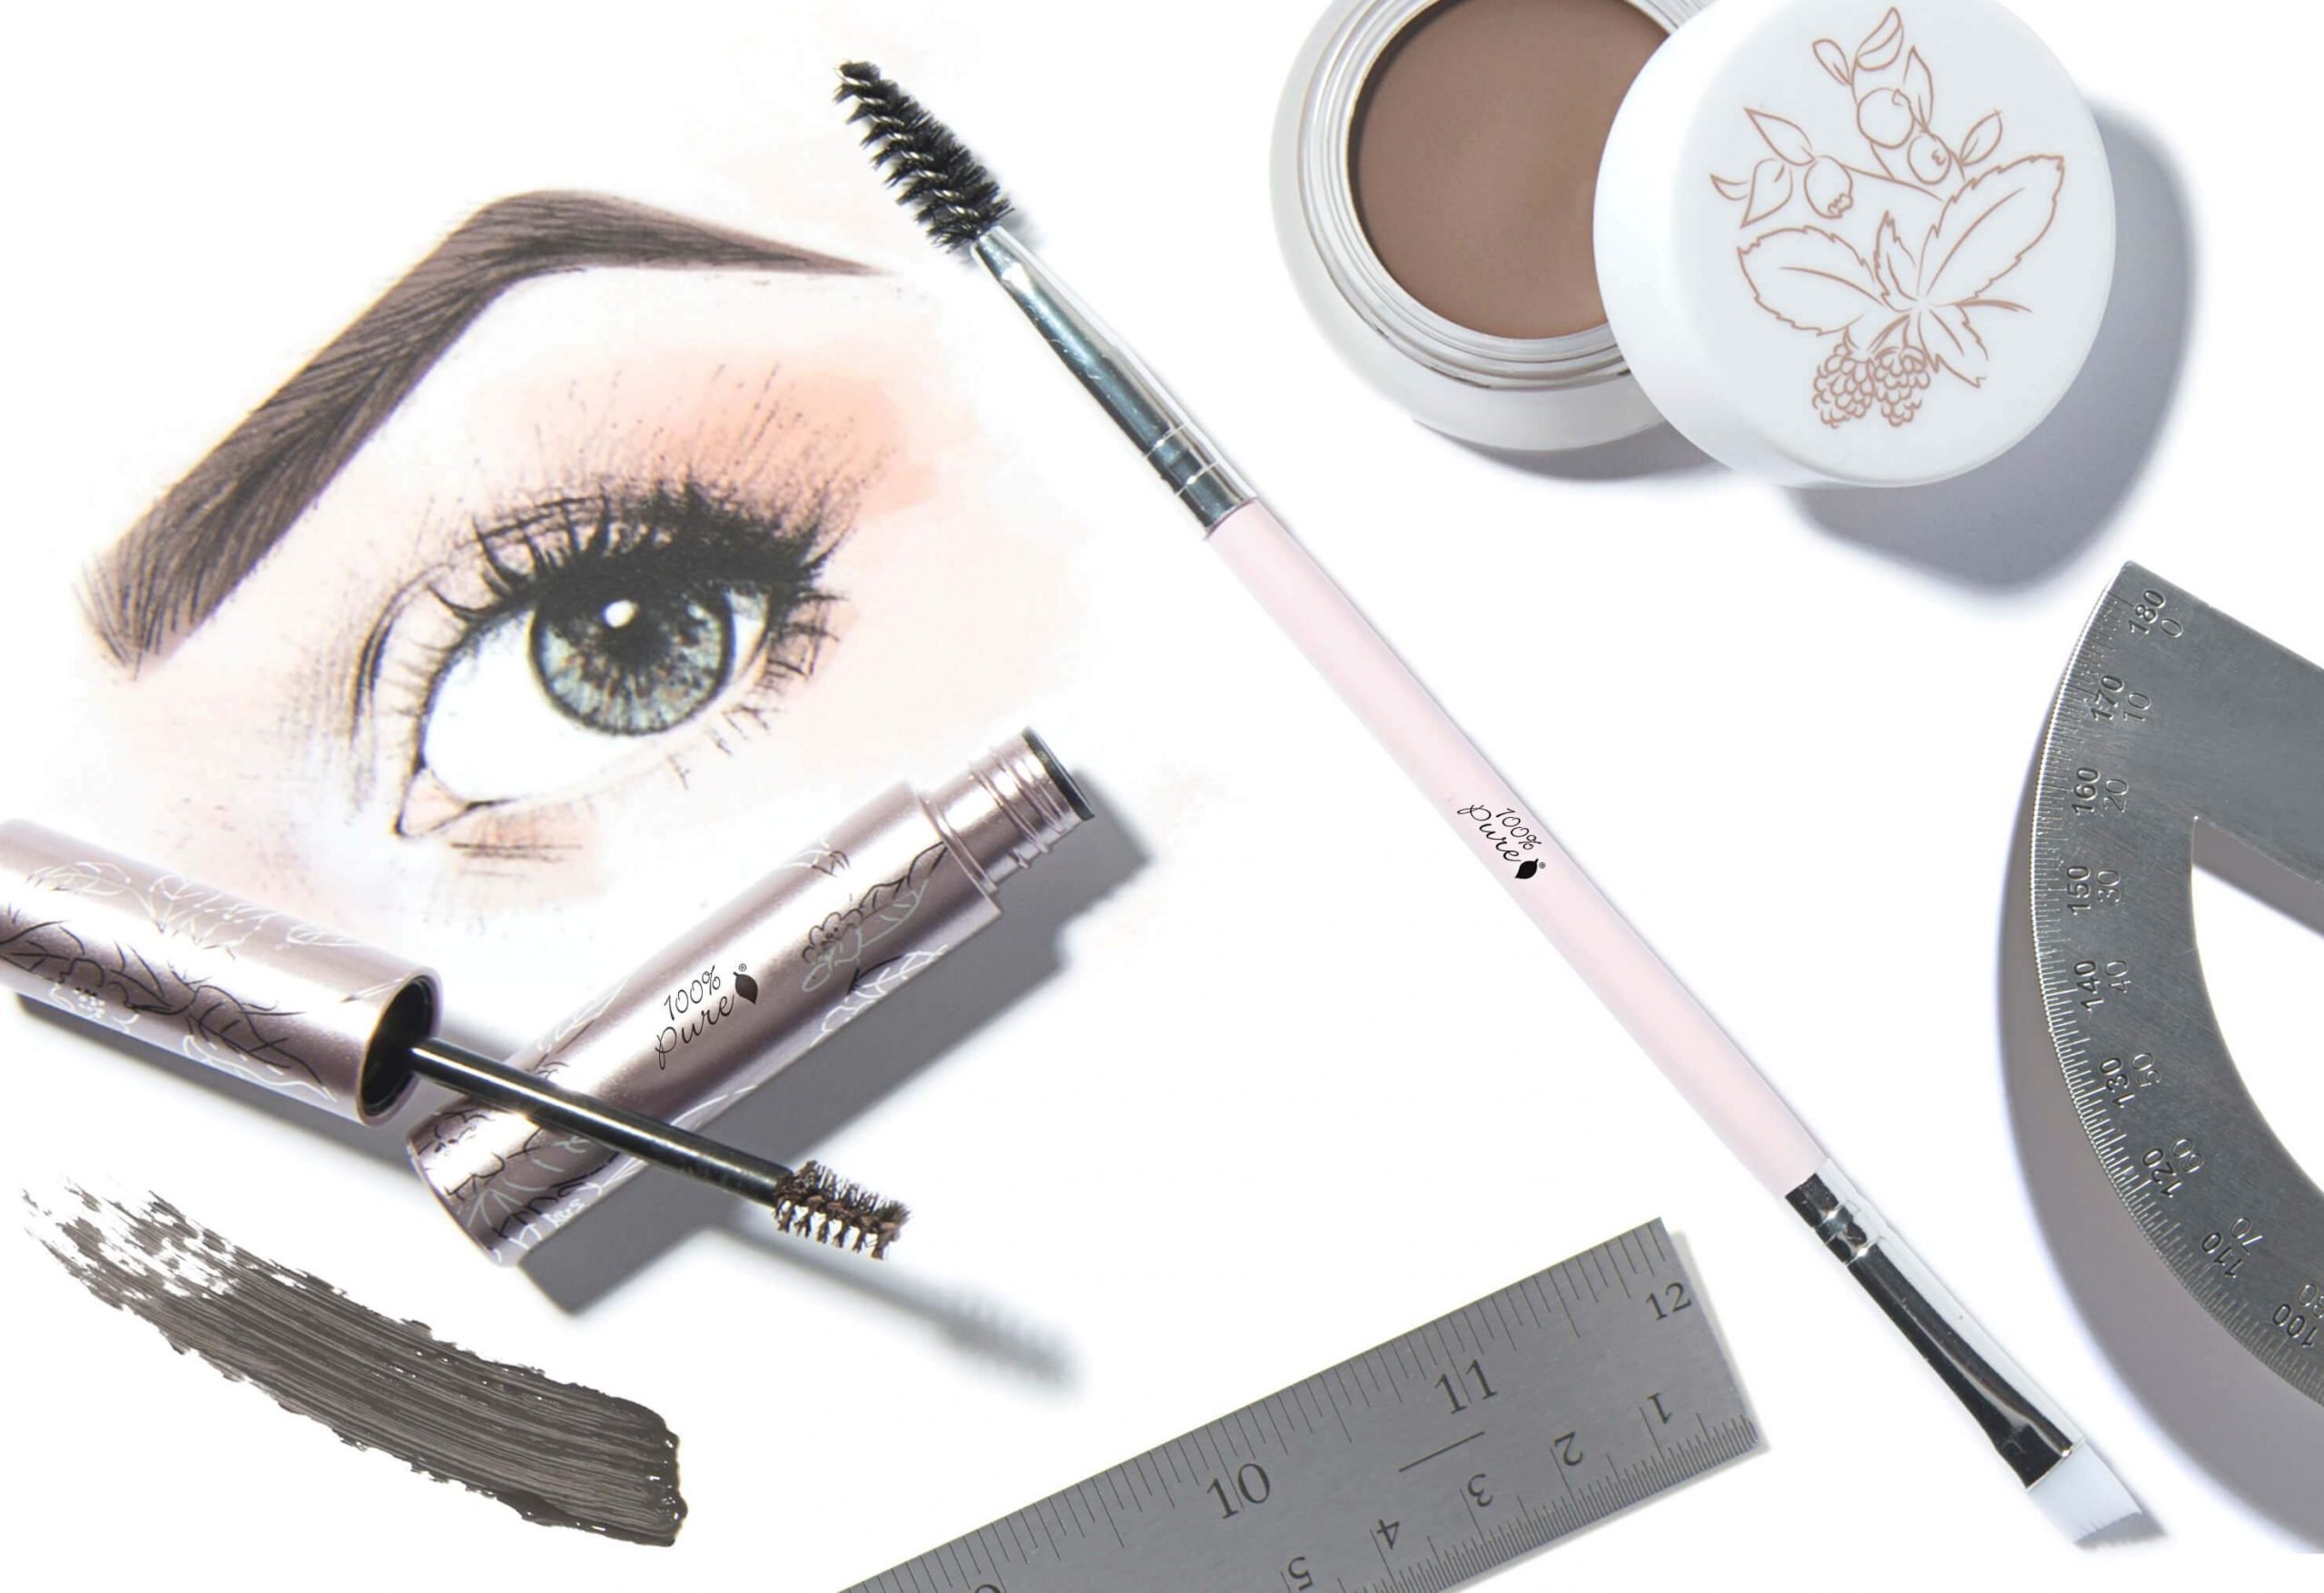 00 Pure Eye Brow Products scaled